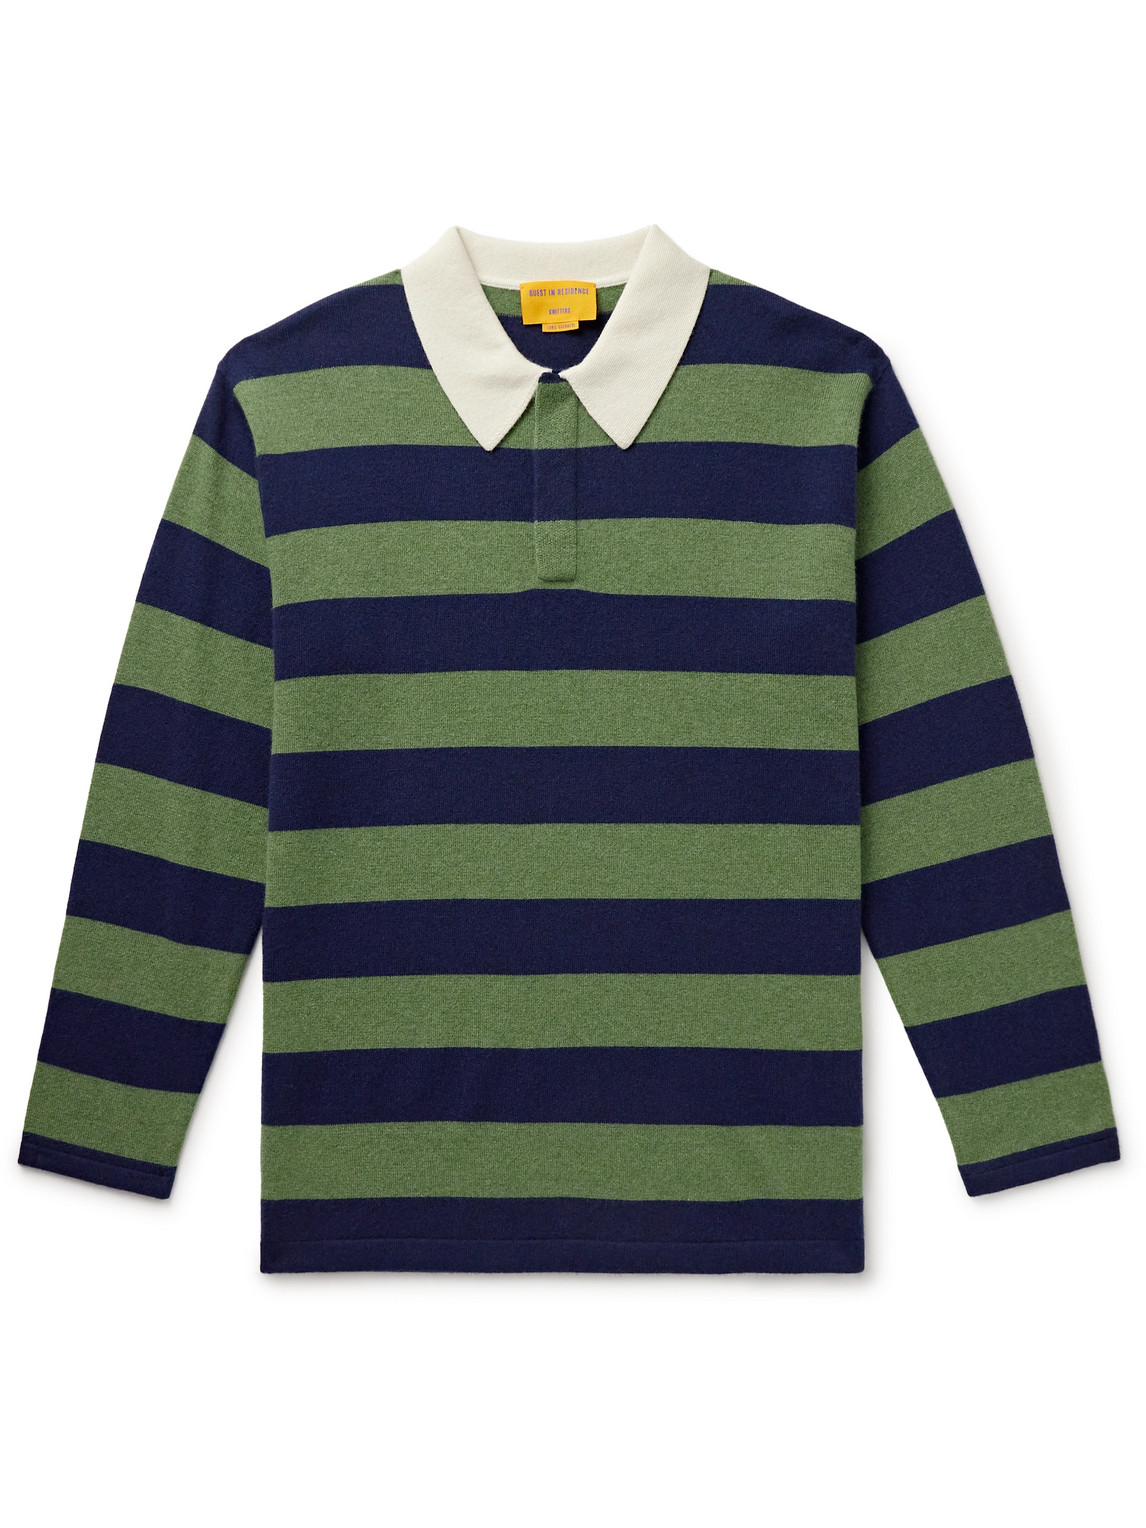 Guest In Residence - Rugby Striped Cashmere Polo Shirt - Men - Green - S von Guest In Residence